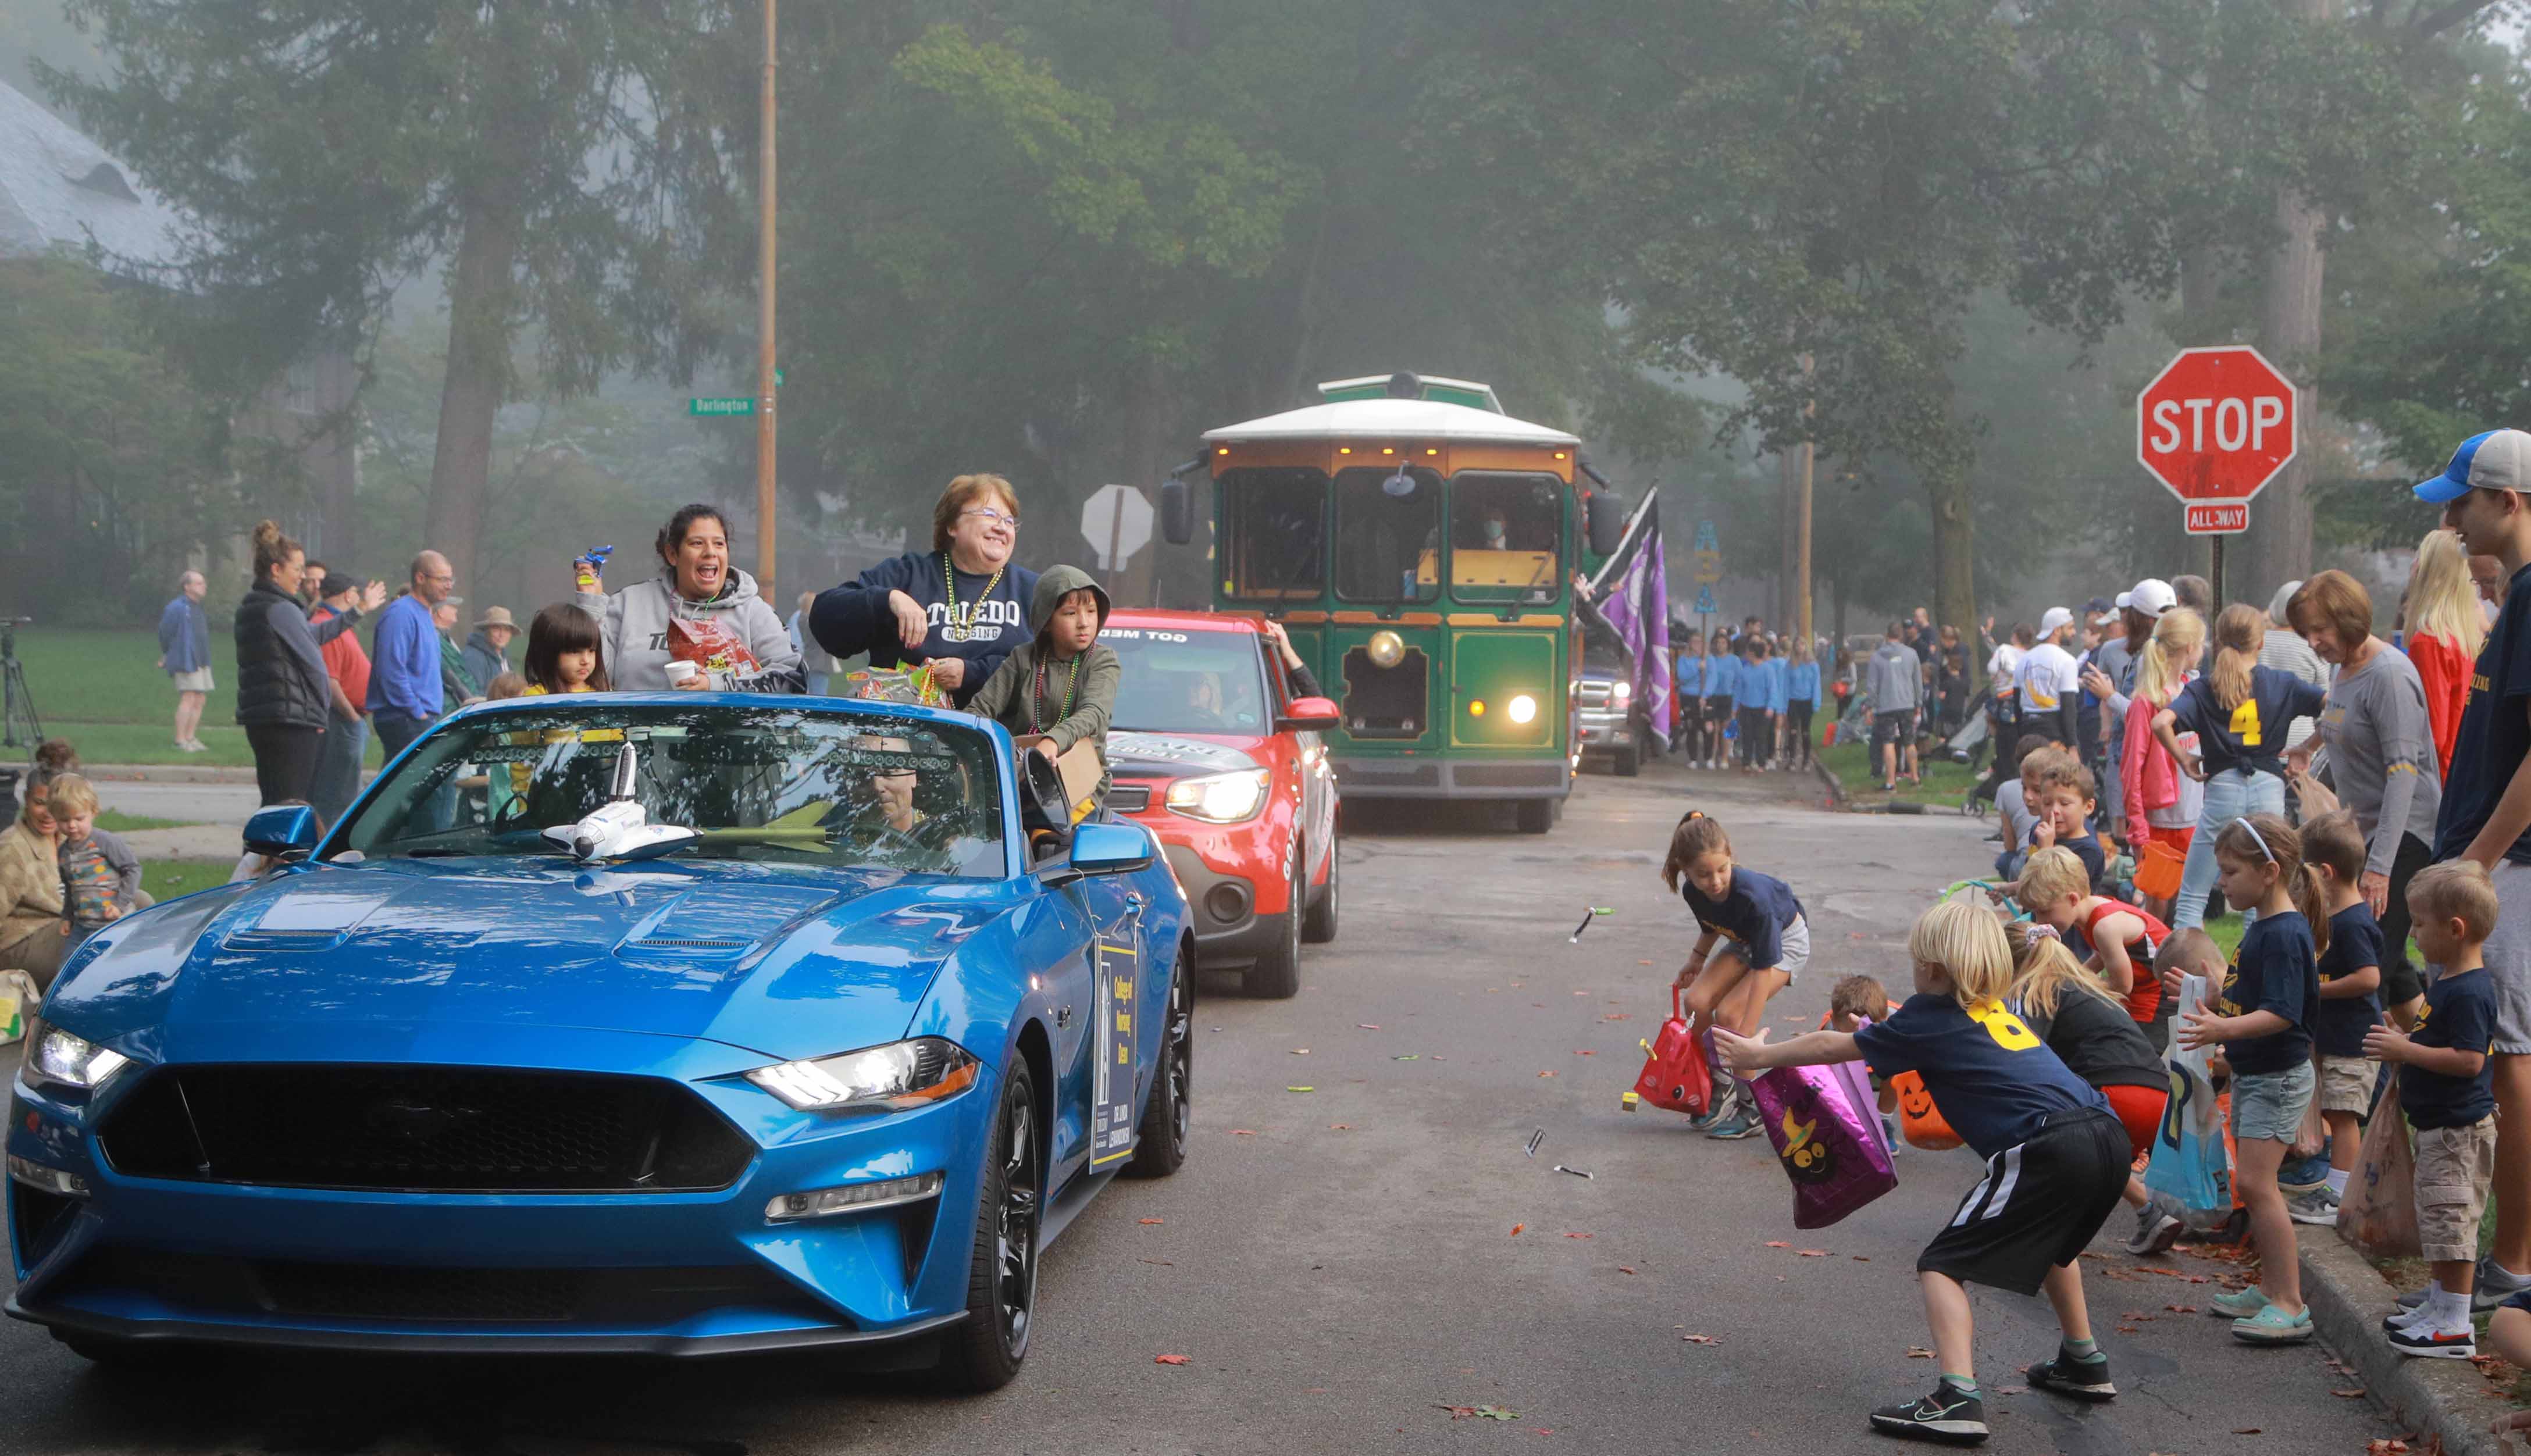 College of Nursing dean in a blue Ford mustang throwing candy to children on sidewalk during 2021 homecoming parade